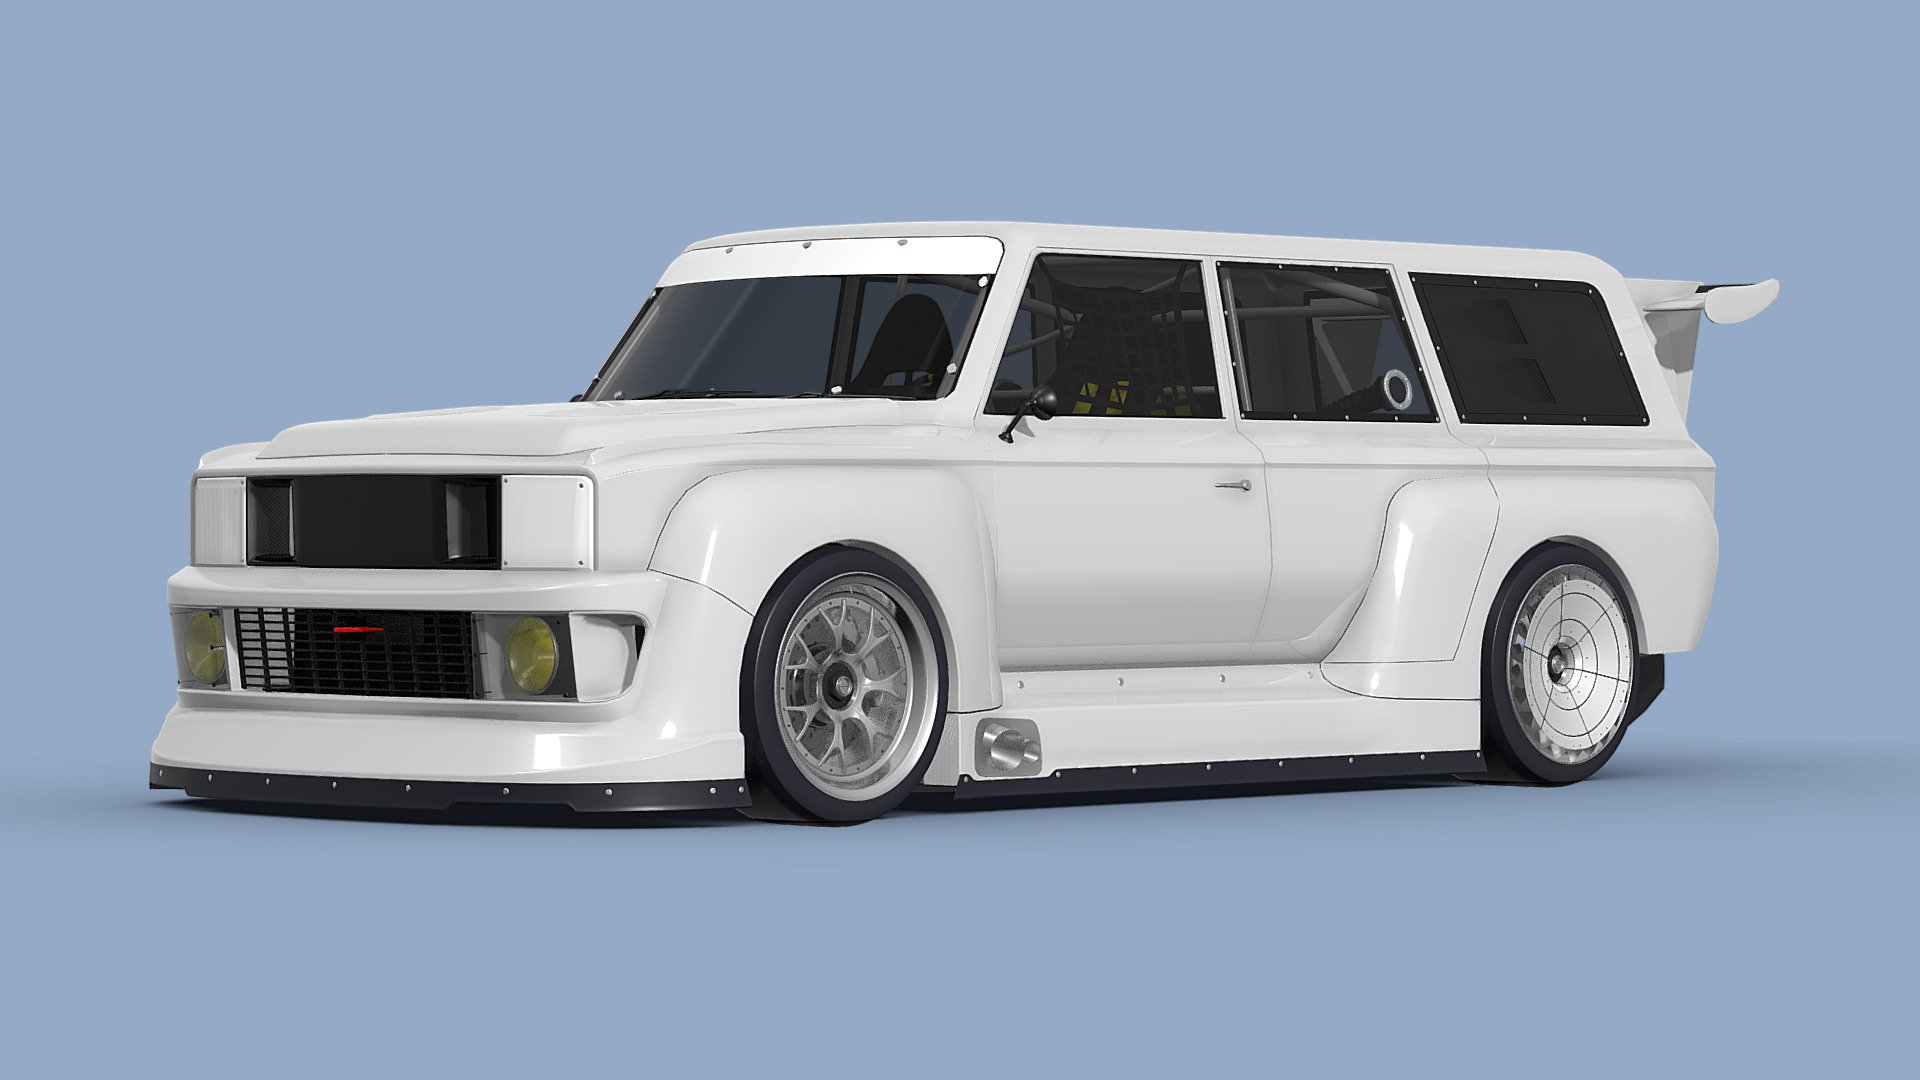 80s 70s Racing SUV - Inspired by IMSA and DTM racing series and based on my generic 80s 4 door SUV. Design heavily influenced by famous german racing car that participated in IMSA back in 80s and 90s. Some of the car elements are modernized, but I tried to stick to 80s - early 90s racing car design.

https://www.artstation.com/artwork/r9DgG6

Model contains:
- Car shell
- Rear Suspension
- Dummy interior
- Brakes
More detailed info:
- Full model contains 350988 polys and 290064 verts
- Model contains 36 objects. Some can be removed to lighten up the model
- Model has predescribed 25 materials
- Model objects names begins with RSUV_&hellip; so that there wouldn't be any object name interference in projects
- Mesh consists mostly of quads with minor amount of n-gons and tris.
- Front wheels contains 27153 polys and 24732 verts. Rear wheels contains 24663 polys and 22152 verts (turbofan element adds 13175 poly and 12791 verts )
- Model is not suitable for 3D printing
- No animations
- No scene objects, only model 3d model